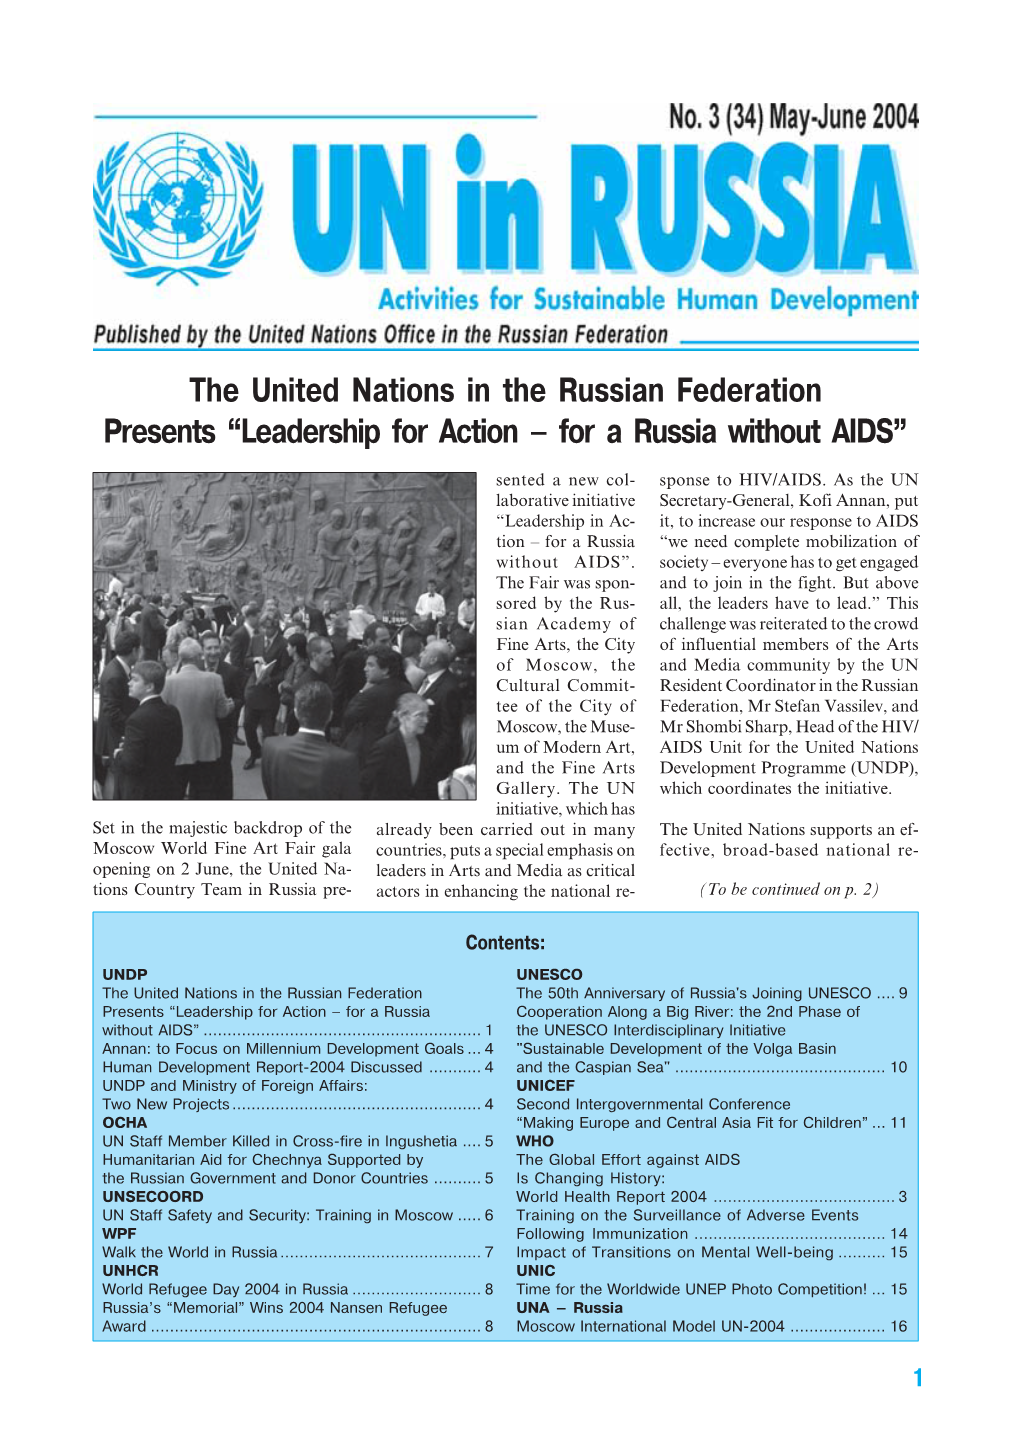 The United Nations in the Russian Federation Presents “Leadership